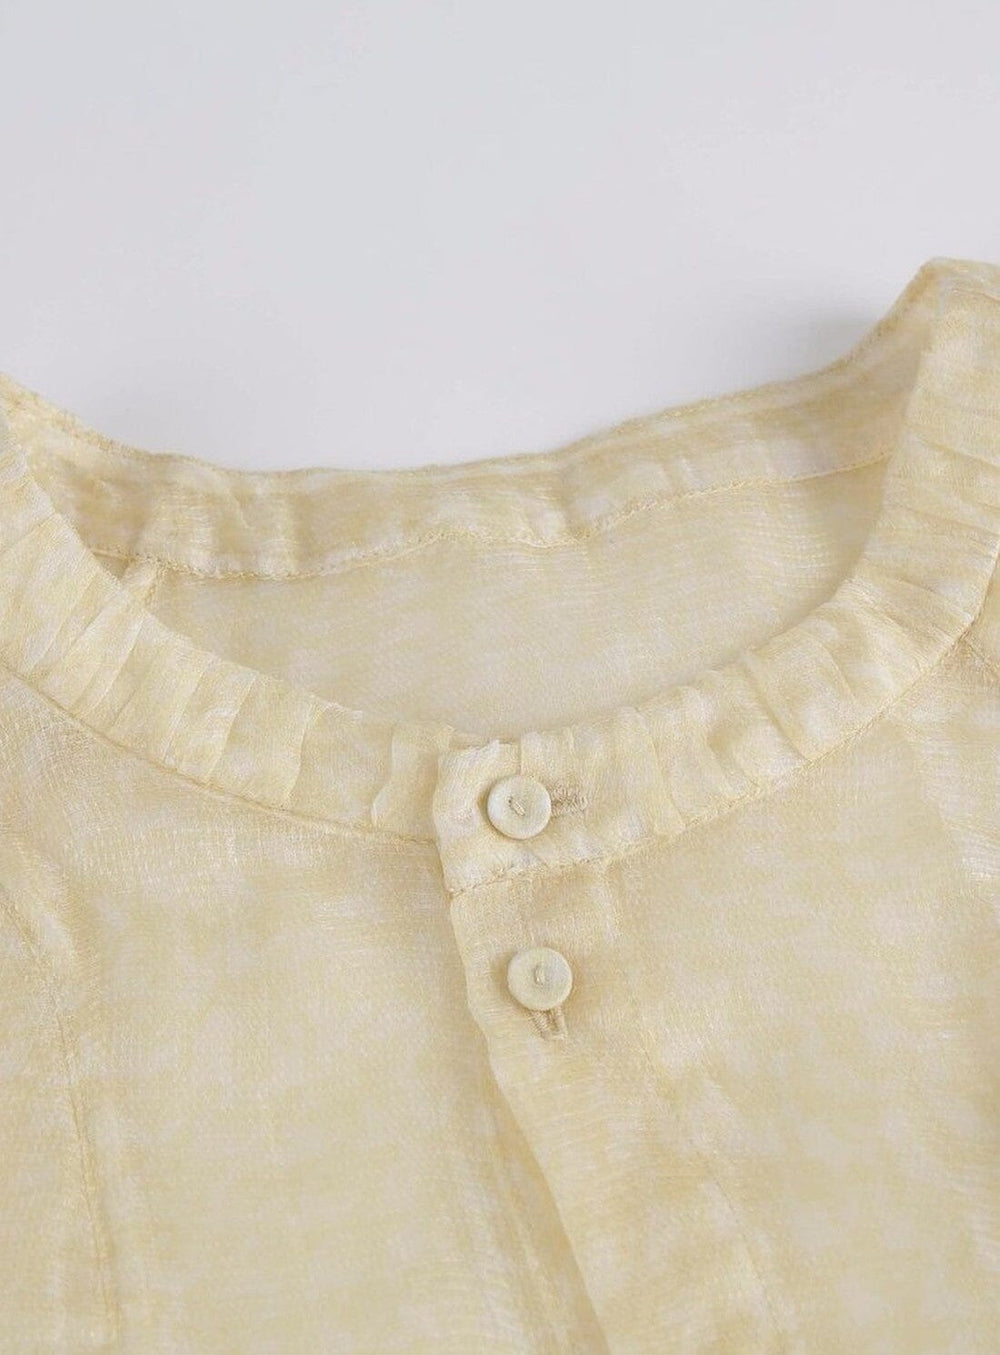 Tulle Silk Tops in Yellow Tops YBDFinds 